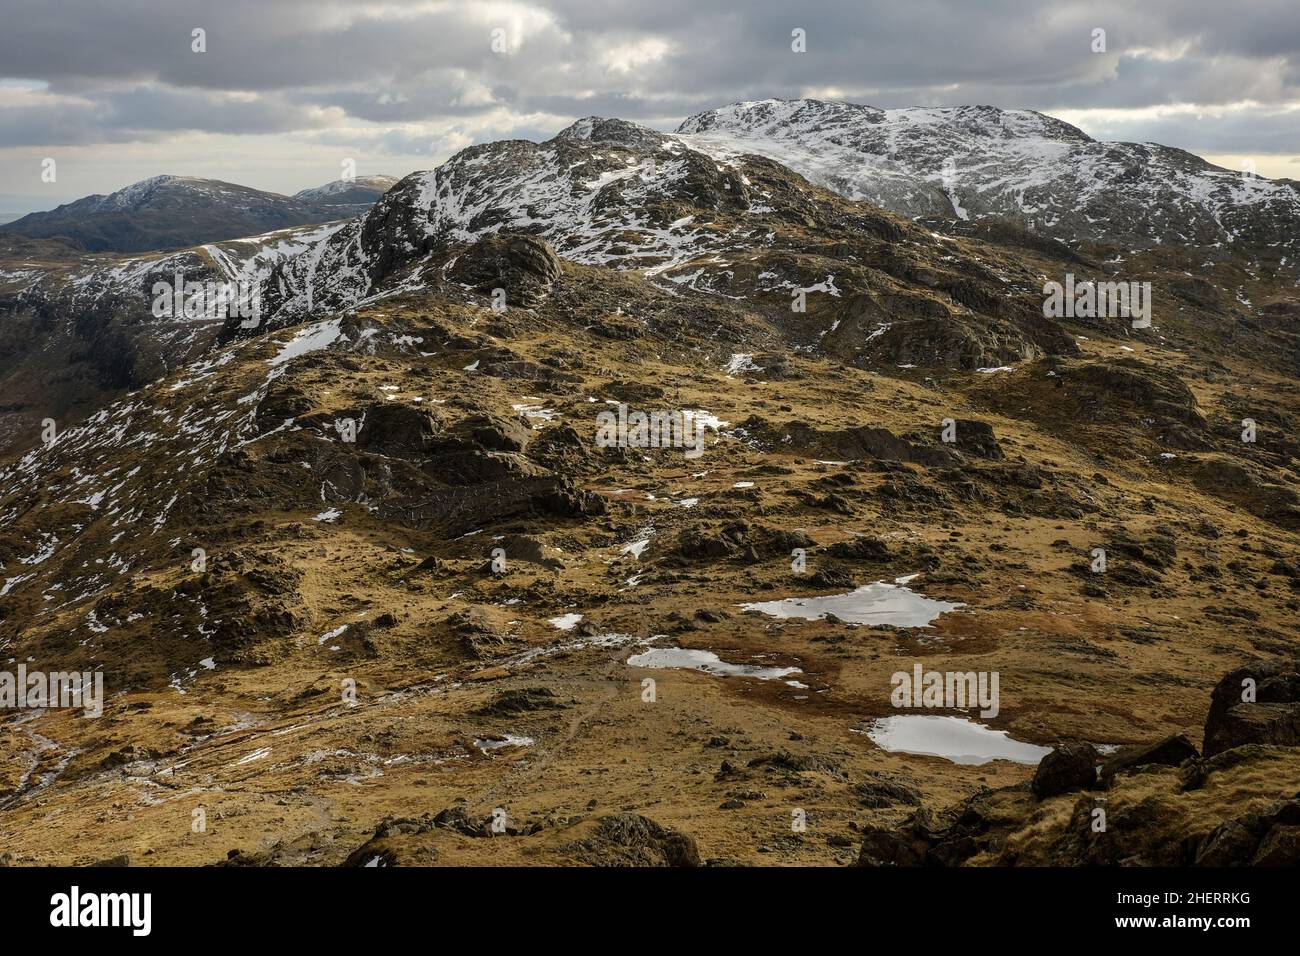 The Three Tarns and Crinkle Crags from Bowfell, The Lake District, England Stock Photo